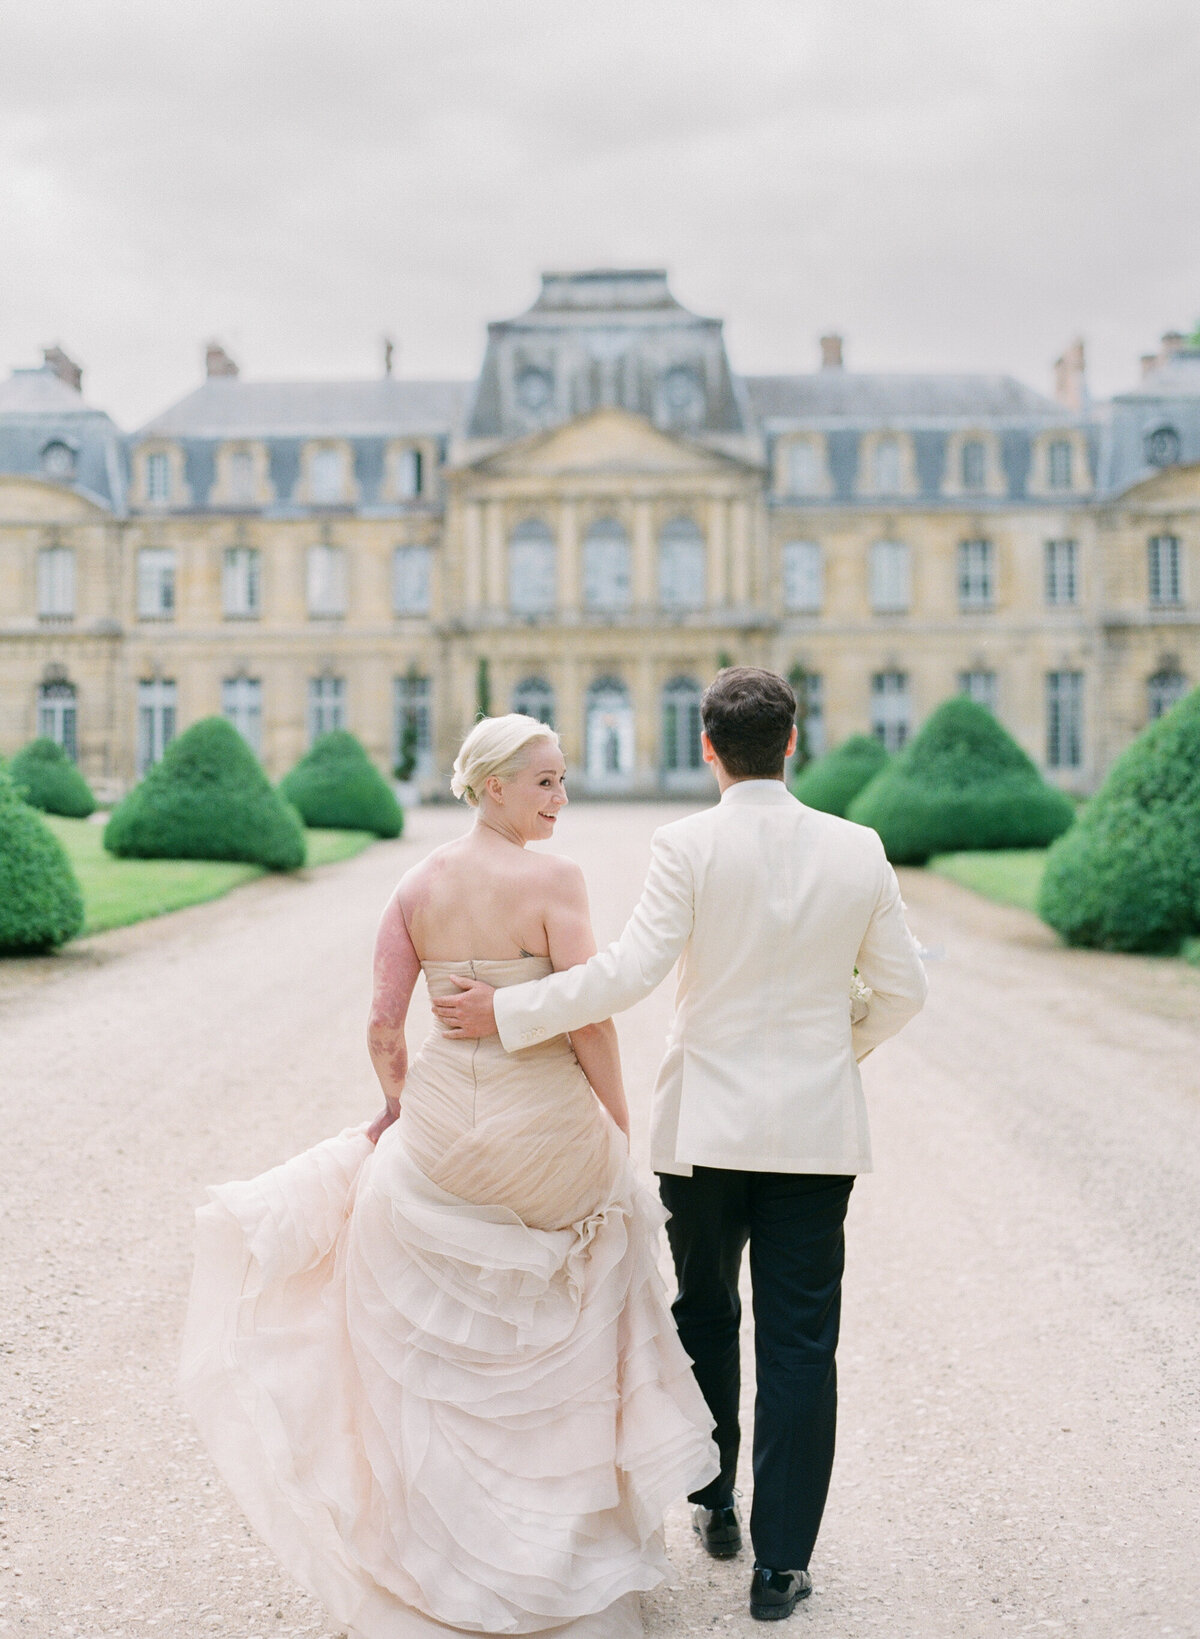 Jennifer Fox Weddings English speaking wedding planning & design agency in France crafting refined and bespoke weddings and celebrations Provence, Paris and destination Laurel-Chris-Chateau-de-Champlatreaux-Molly-Carr-Photography-54